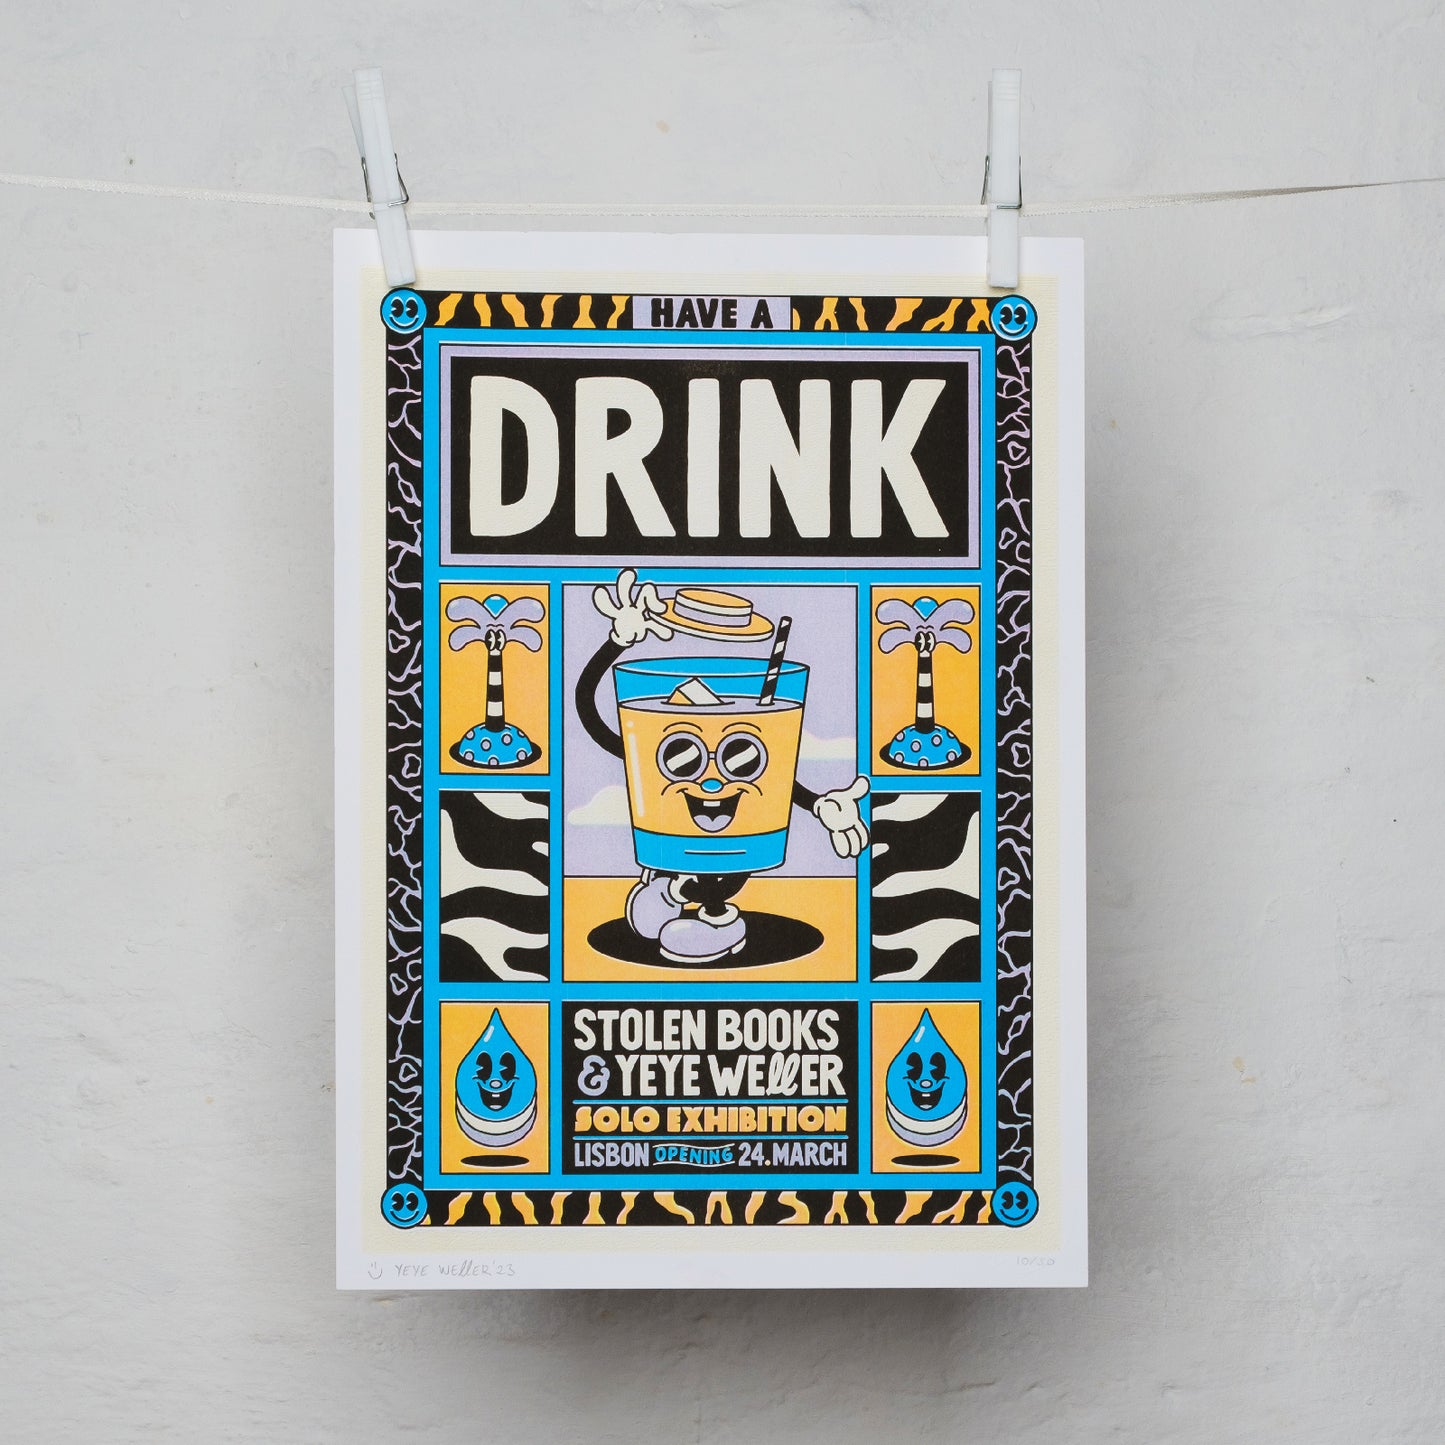 HAVE A DRINK "EXHIBITION LISBON" – RISO PRINT